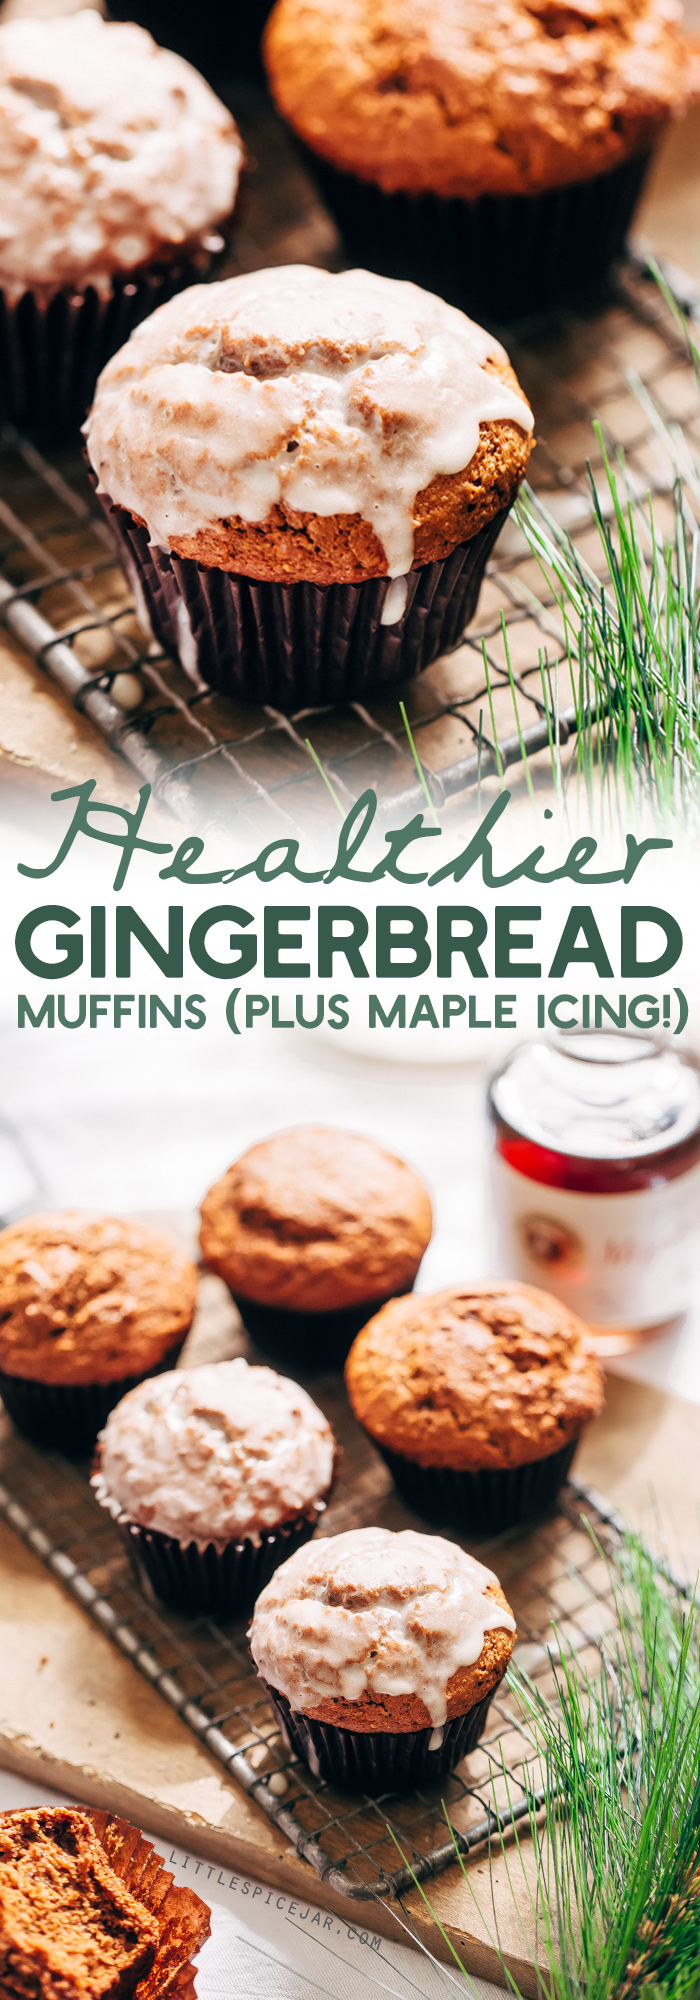 Healthier Gingerbread Muffins - swapping out a few ingredients makes these healthier. You can top them with turbinado sugar or an added crunch or dip them in icing! #healthygingerbreadmuffins #muffins #gingerbreadmuffins #gingerbread | Littlespicejar.com